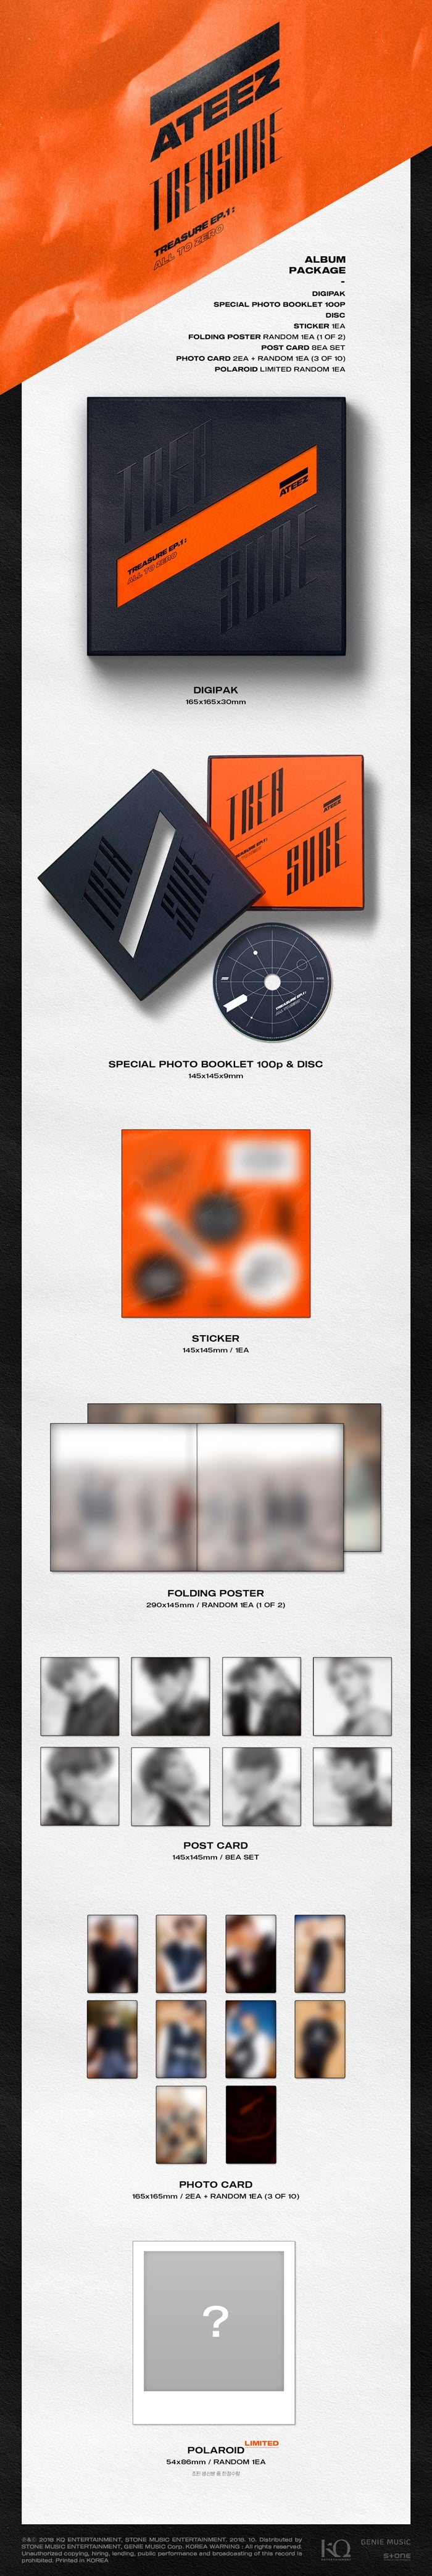 1 CD
1 Special Photo Booklet (100 pages)
1 Sticker
1 Folding Poster
8 Postcards
3 Photo Cards (random out of 10 types)